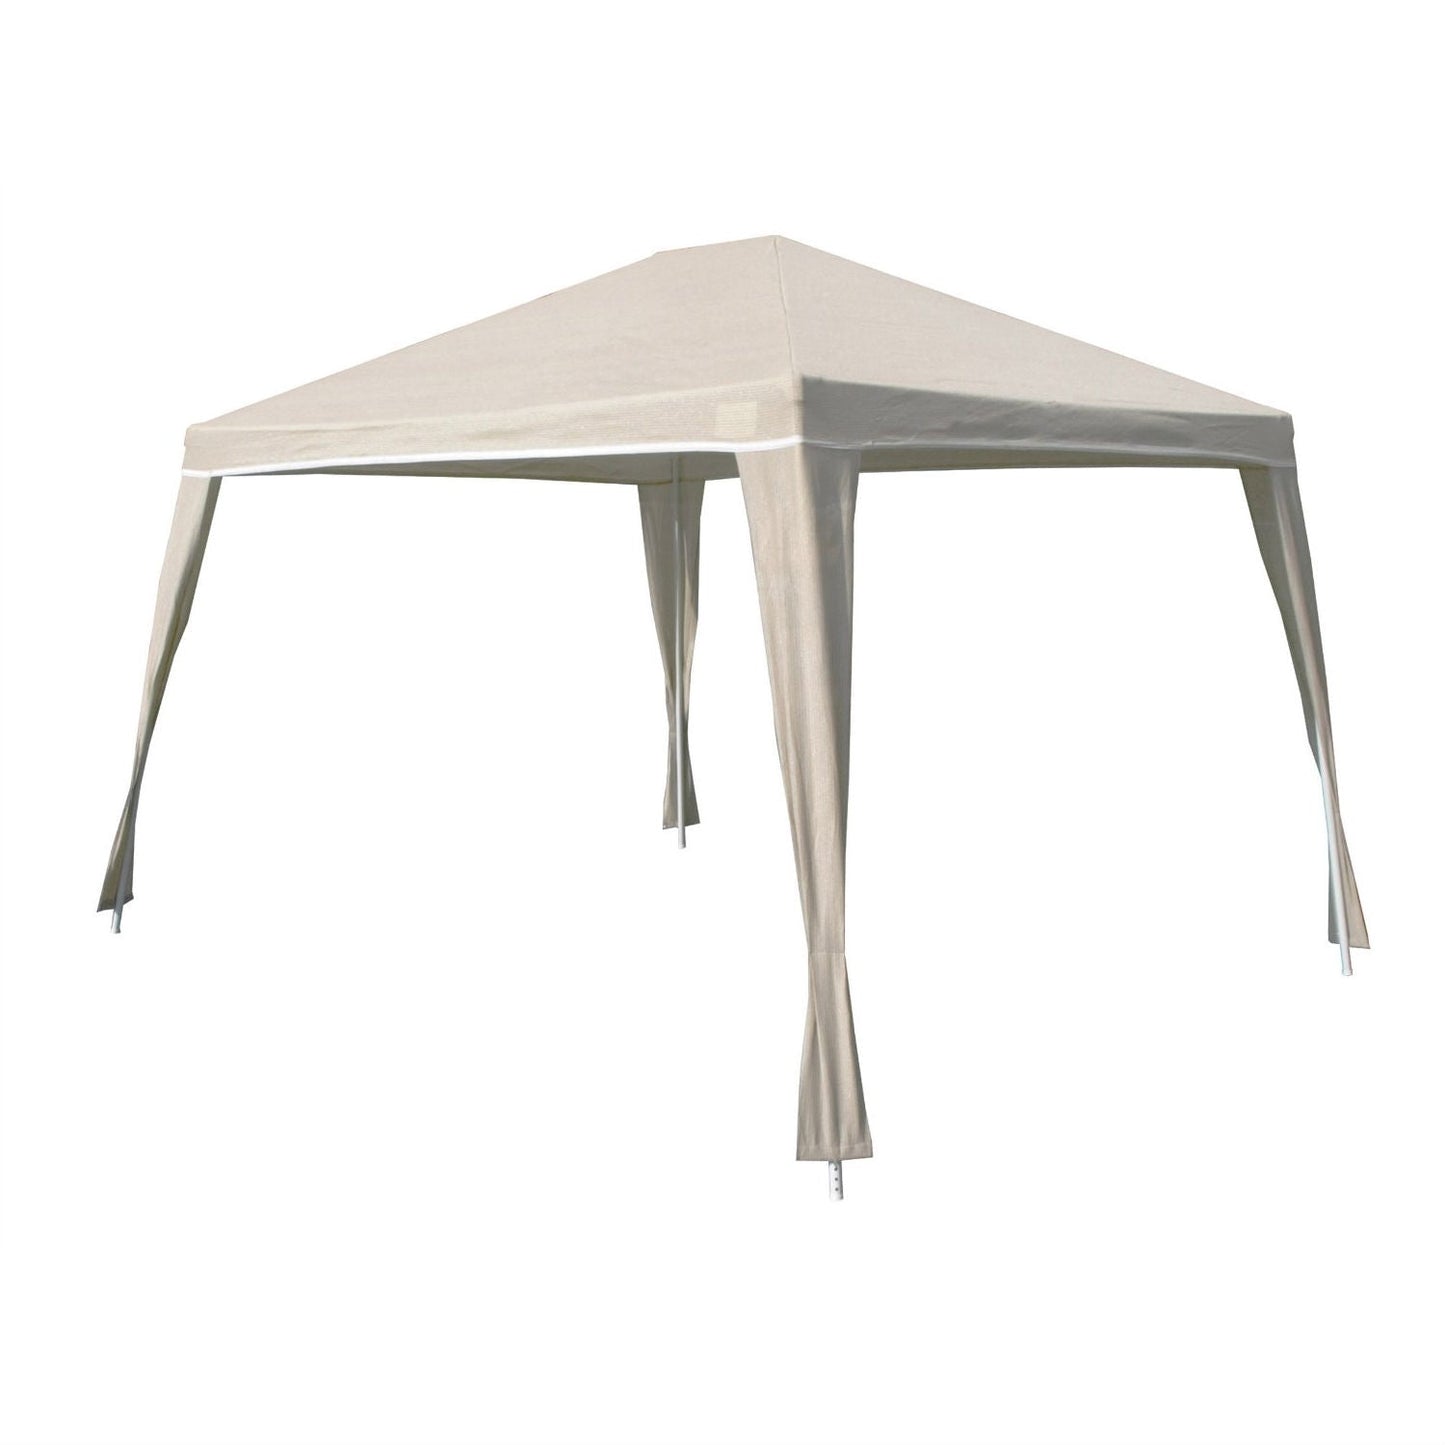 Outdoor > Gazebos & Canopies - Weather Resistant 10-Ft X 12-Ft Gazebo With UV Blocking Canopy In Camel